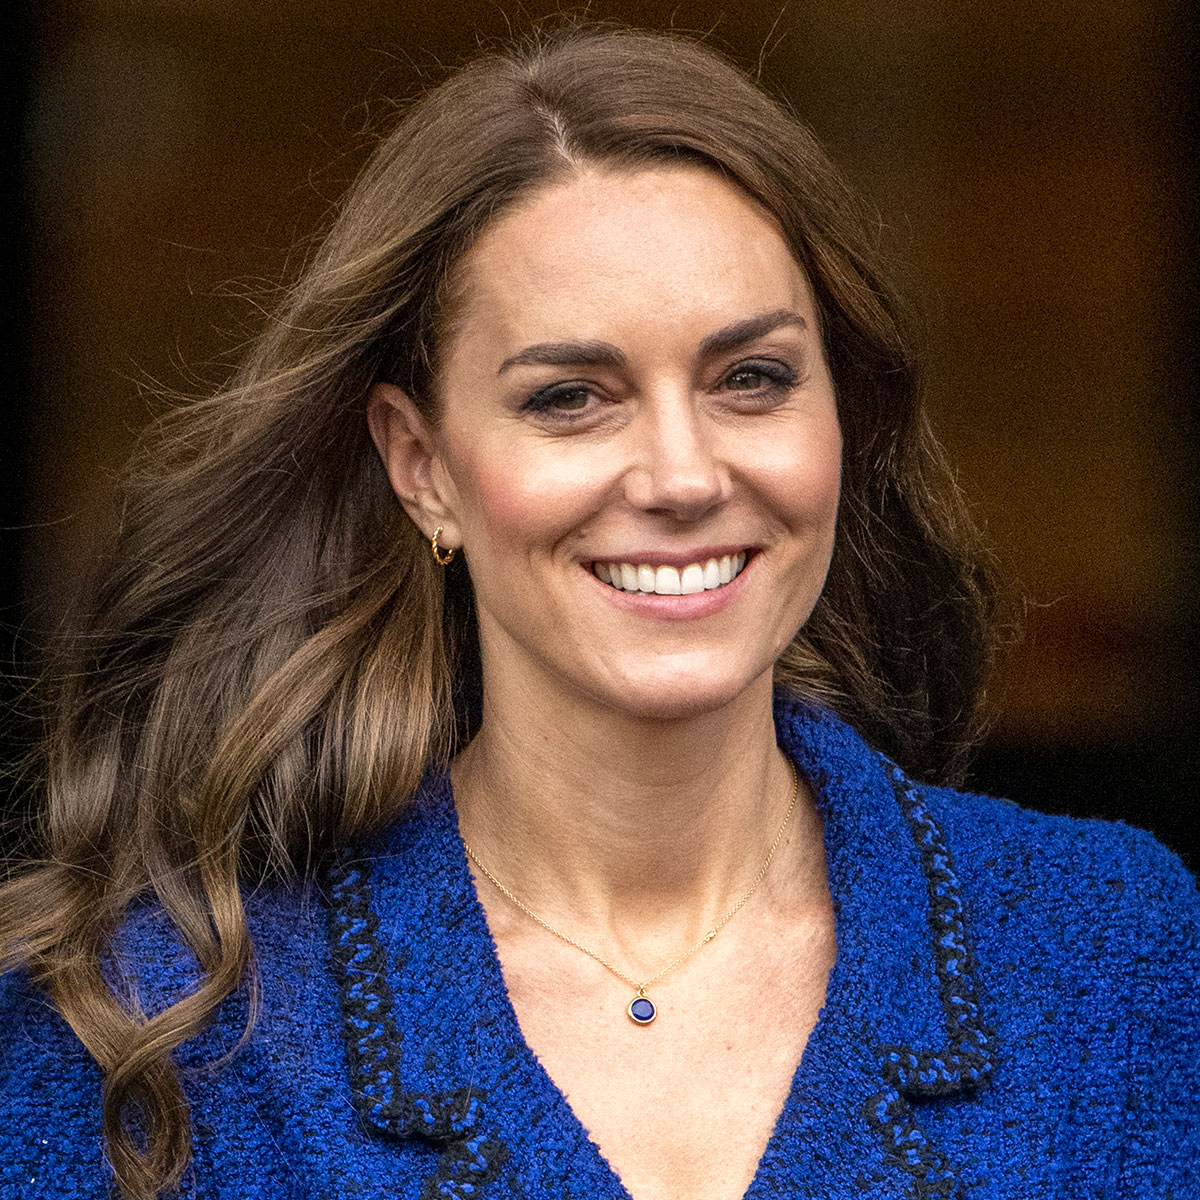 Kate Middleton Just Wore A $40 Zara Blazer To A Radio Interview With Prince William—Here’s How You Can Get One!